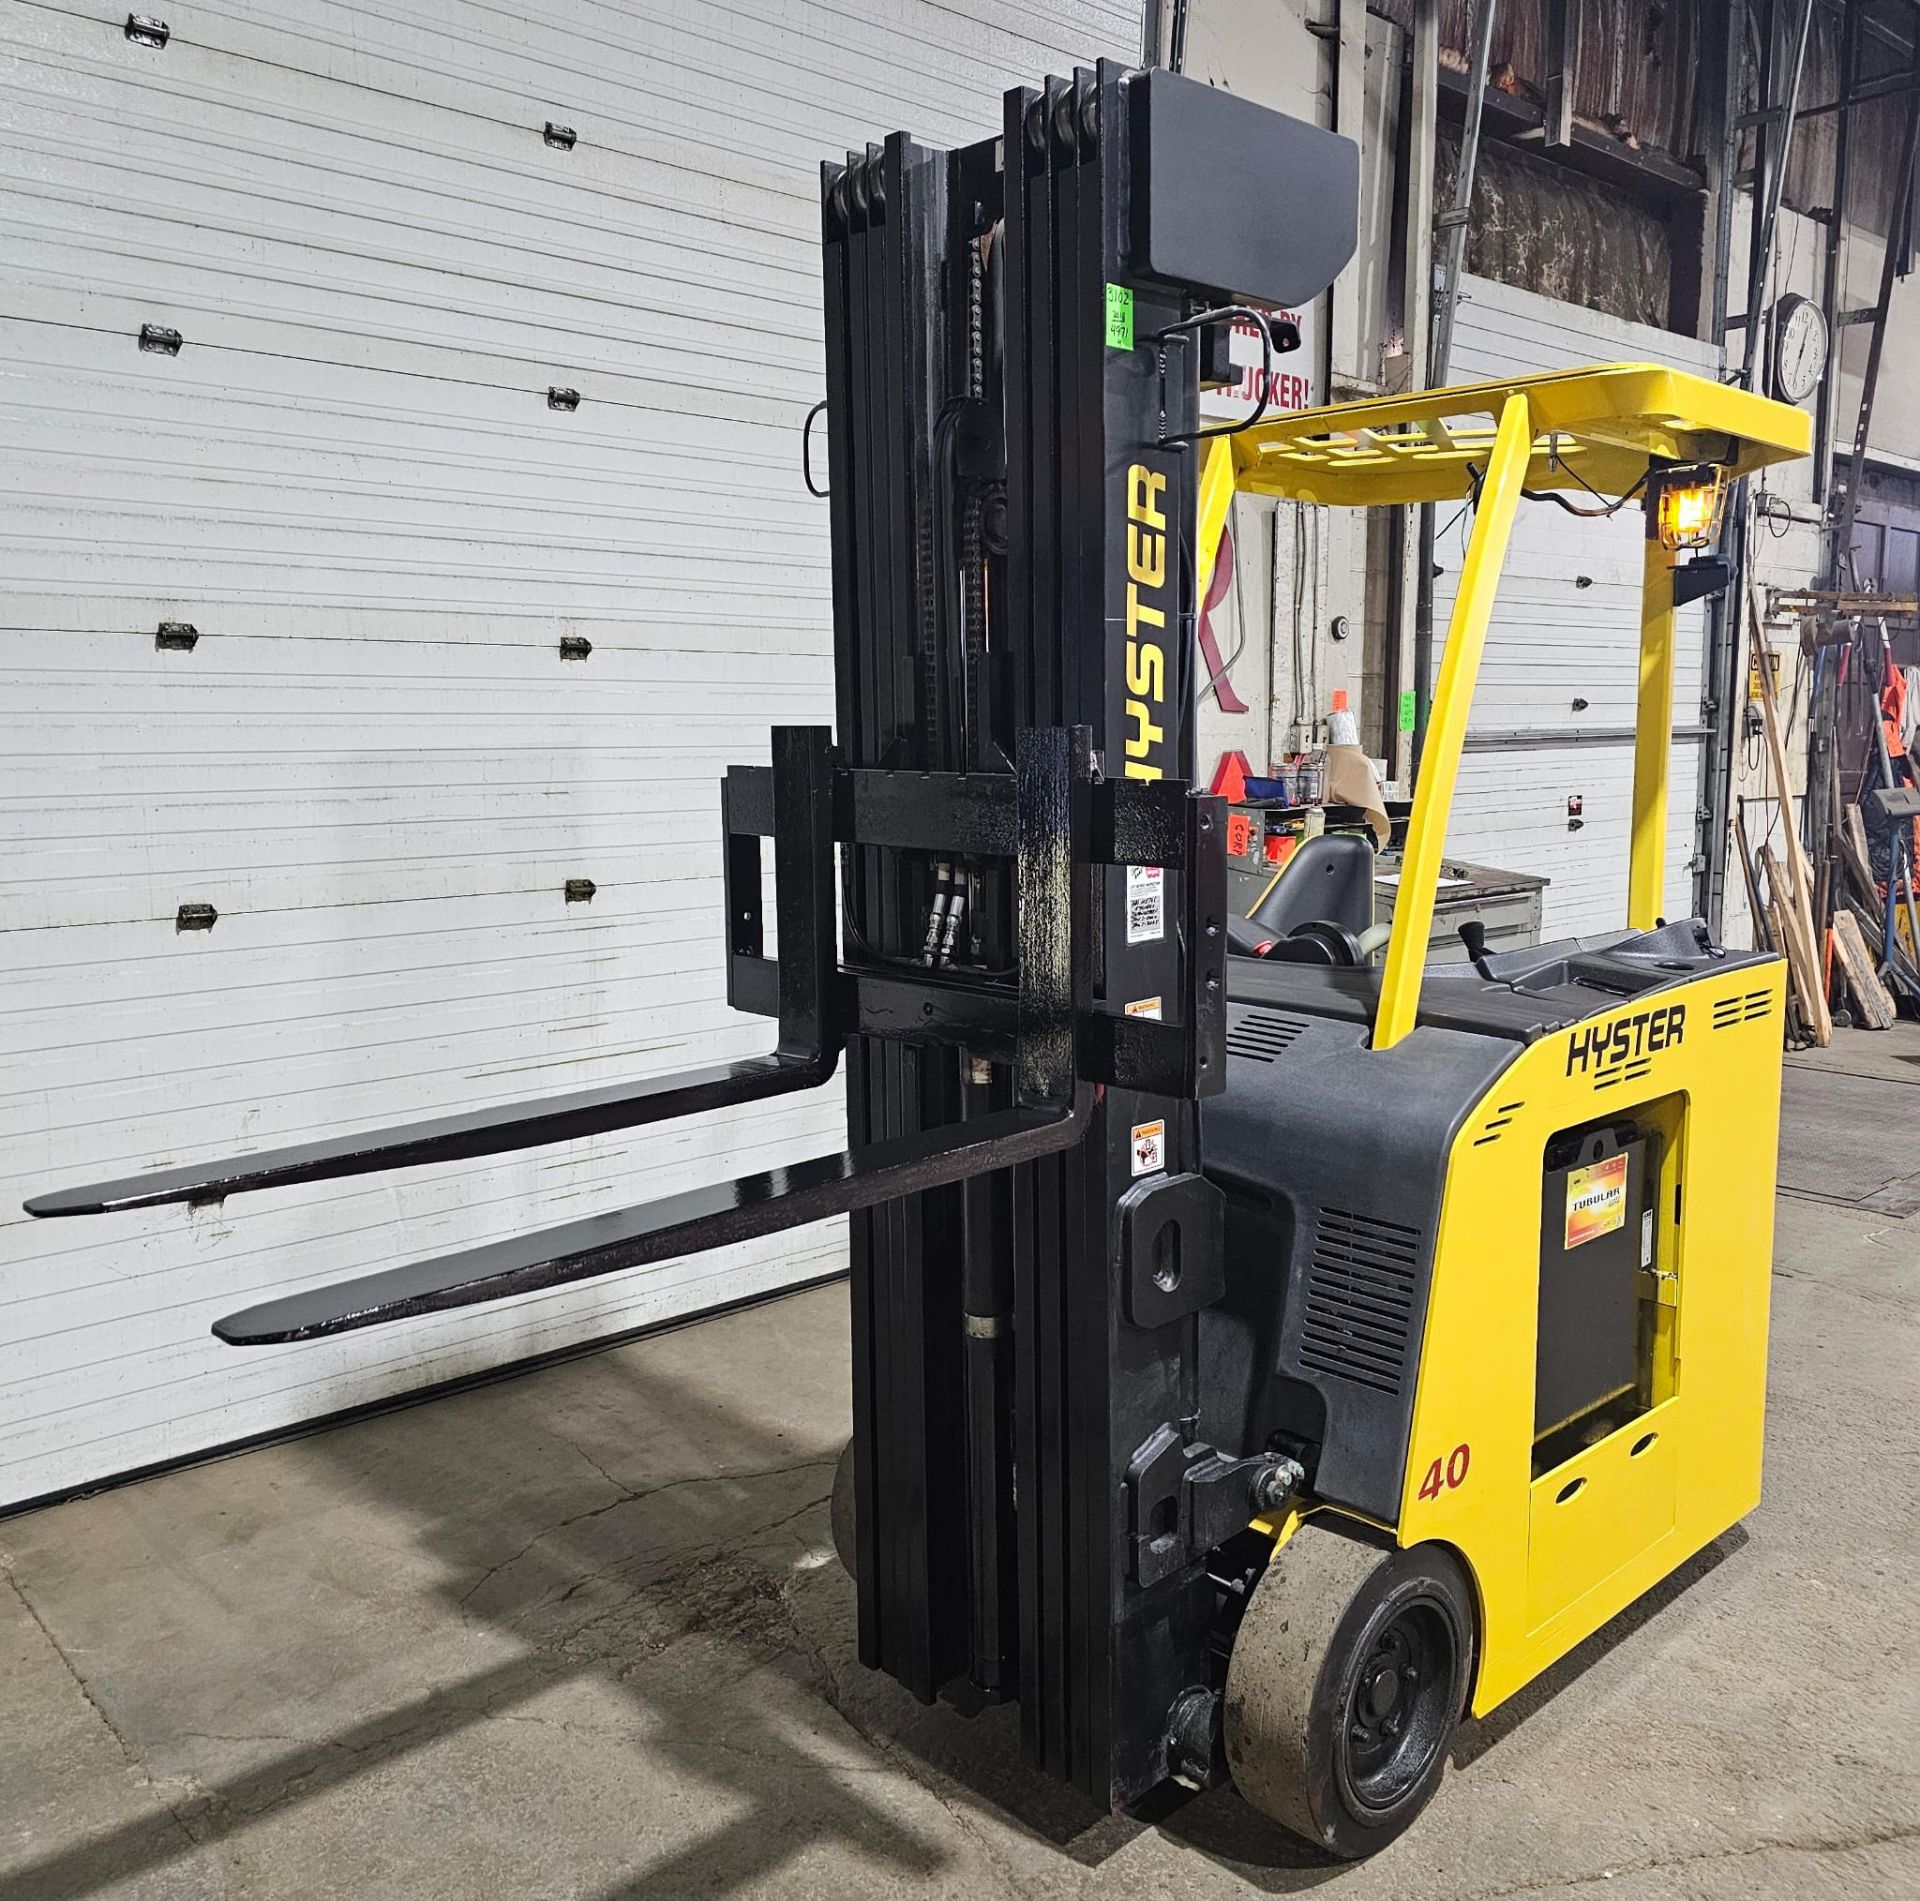 2018 Hyster 4,000lbs Capacity Stand-On Electric Forklift 36V sideshift 4-STAGE MAST 283" load height - Image 4 of 5